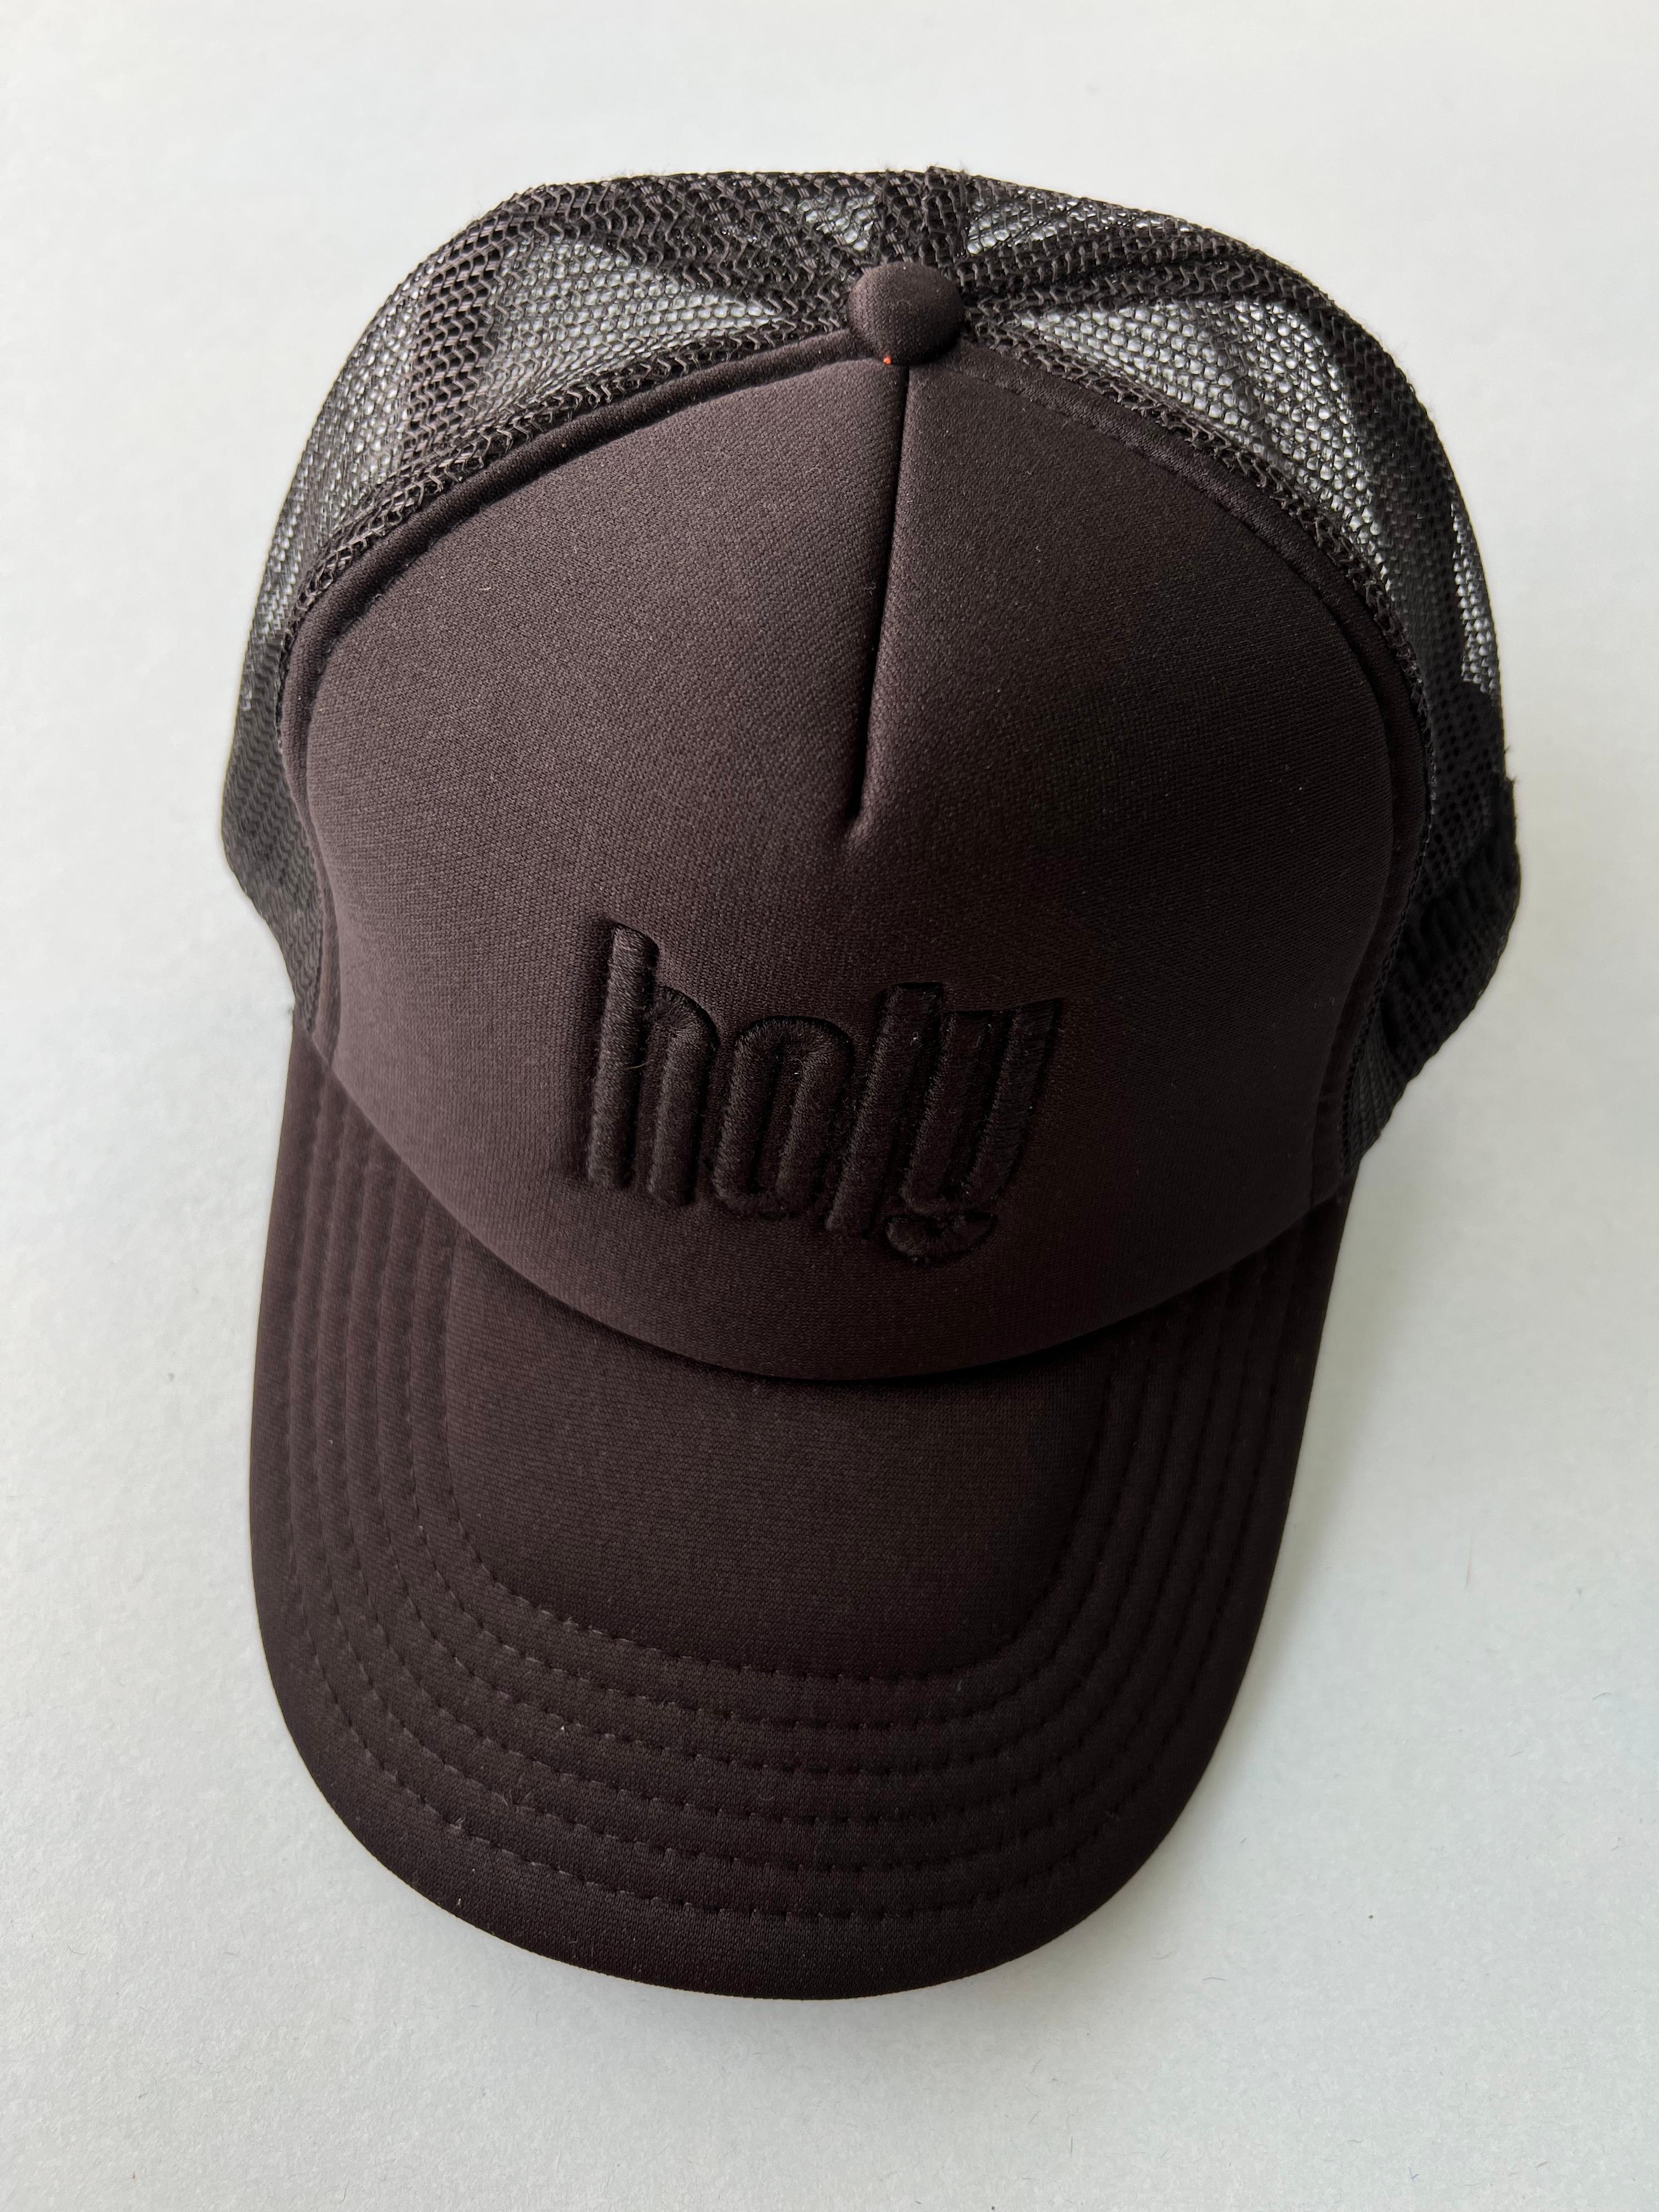 Brand: J Dauphin
Trucker Hat Black on Black Holy Embroidery Unisex

Embroidery Made in LA

Express a hybrid of easy-luxe and bourgeoisie jet-set look. Effortless and versatile, elegant and classy they bring an allure of unexpected outside-the-box